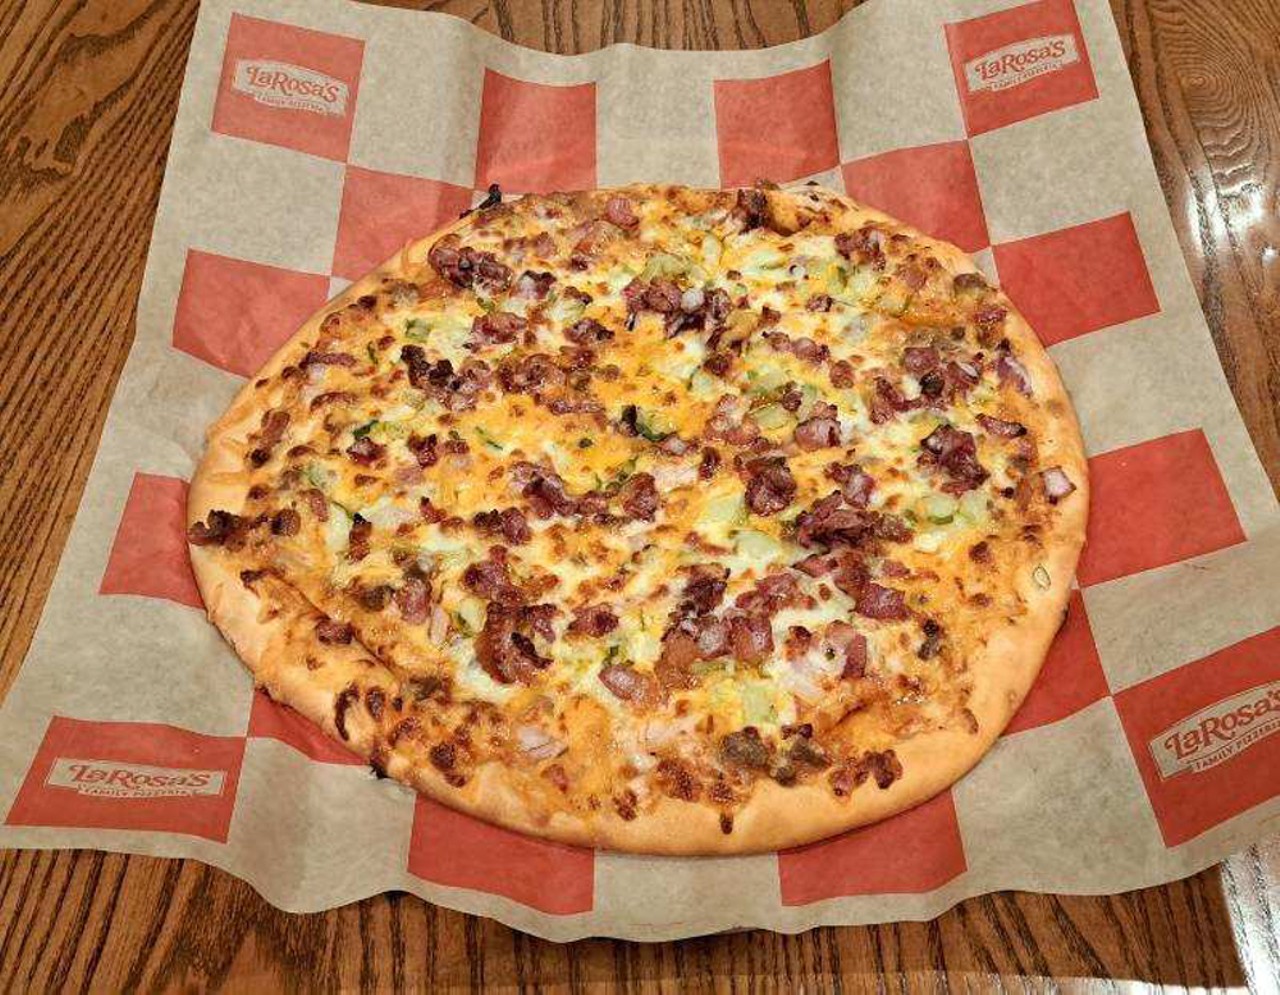  LaRosa's Pizzeria 
10641 Fischer Park Dr. 
Cheeseburger Pizza
Deluxe Cheeseburger on a pizza crust &#150; with special burger sauce, ground beef, bacon, onions, pickles, provolone and cheddar cheeses.